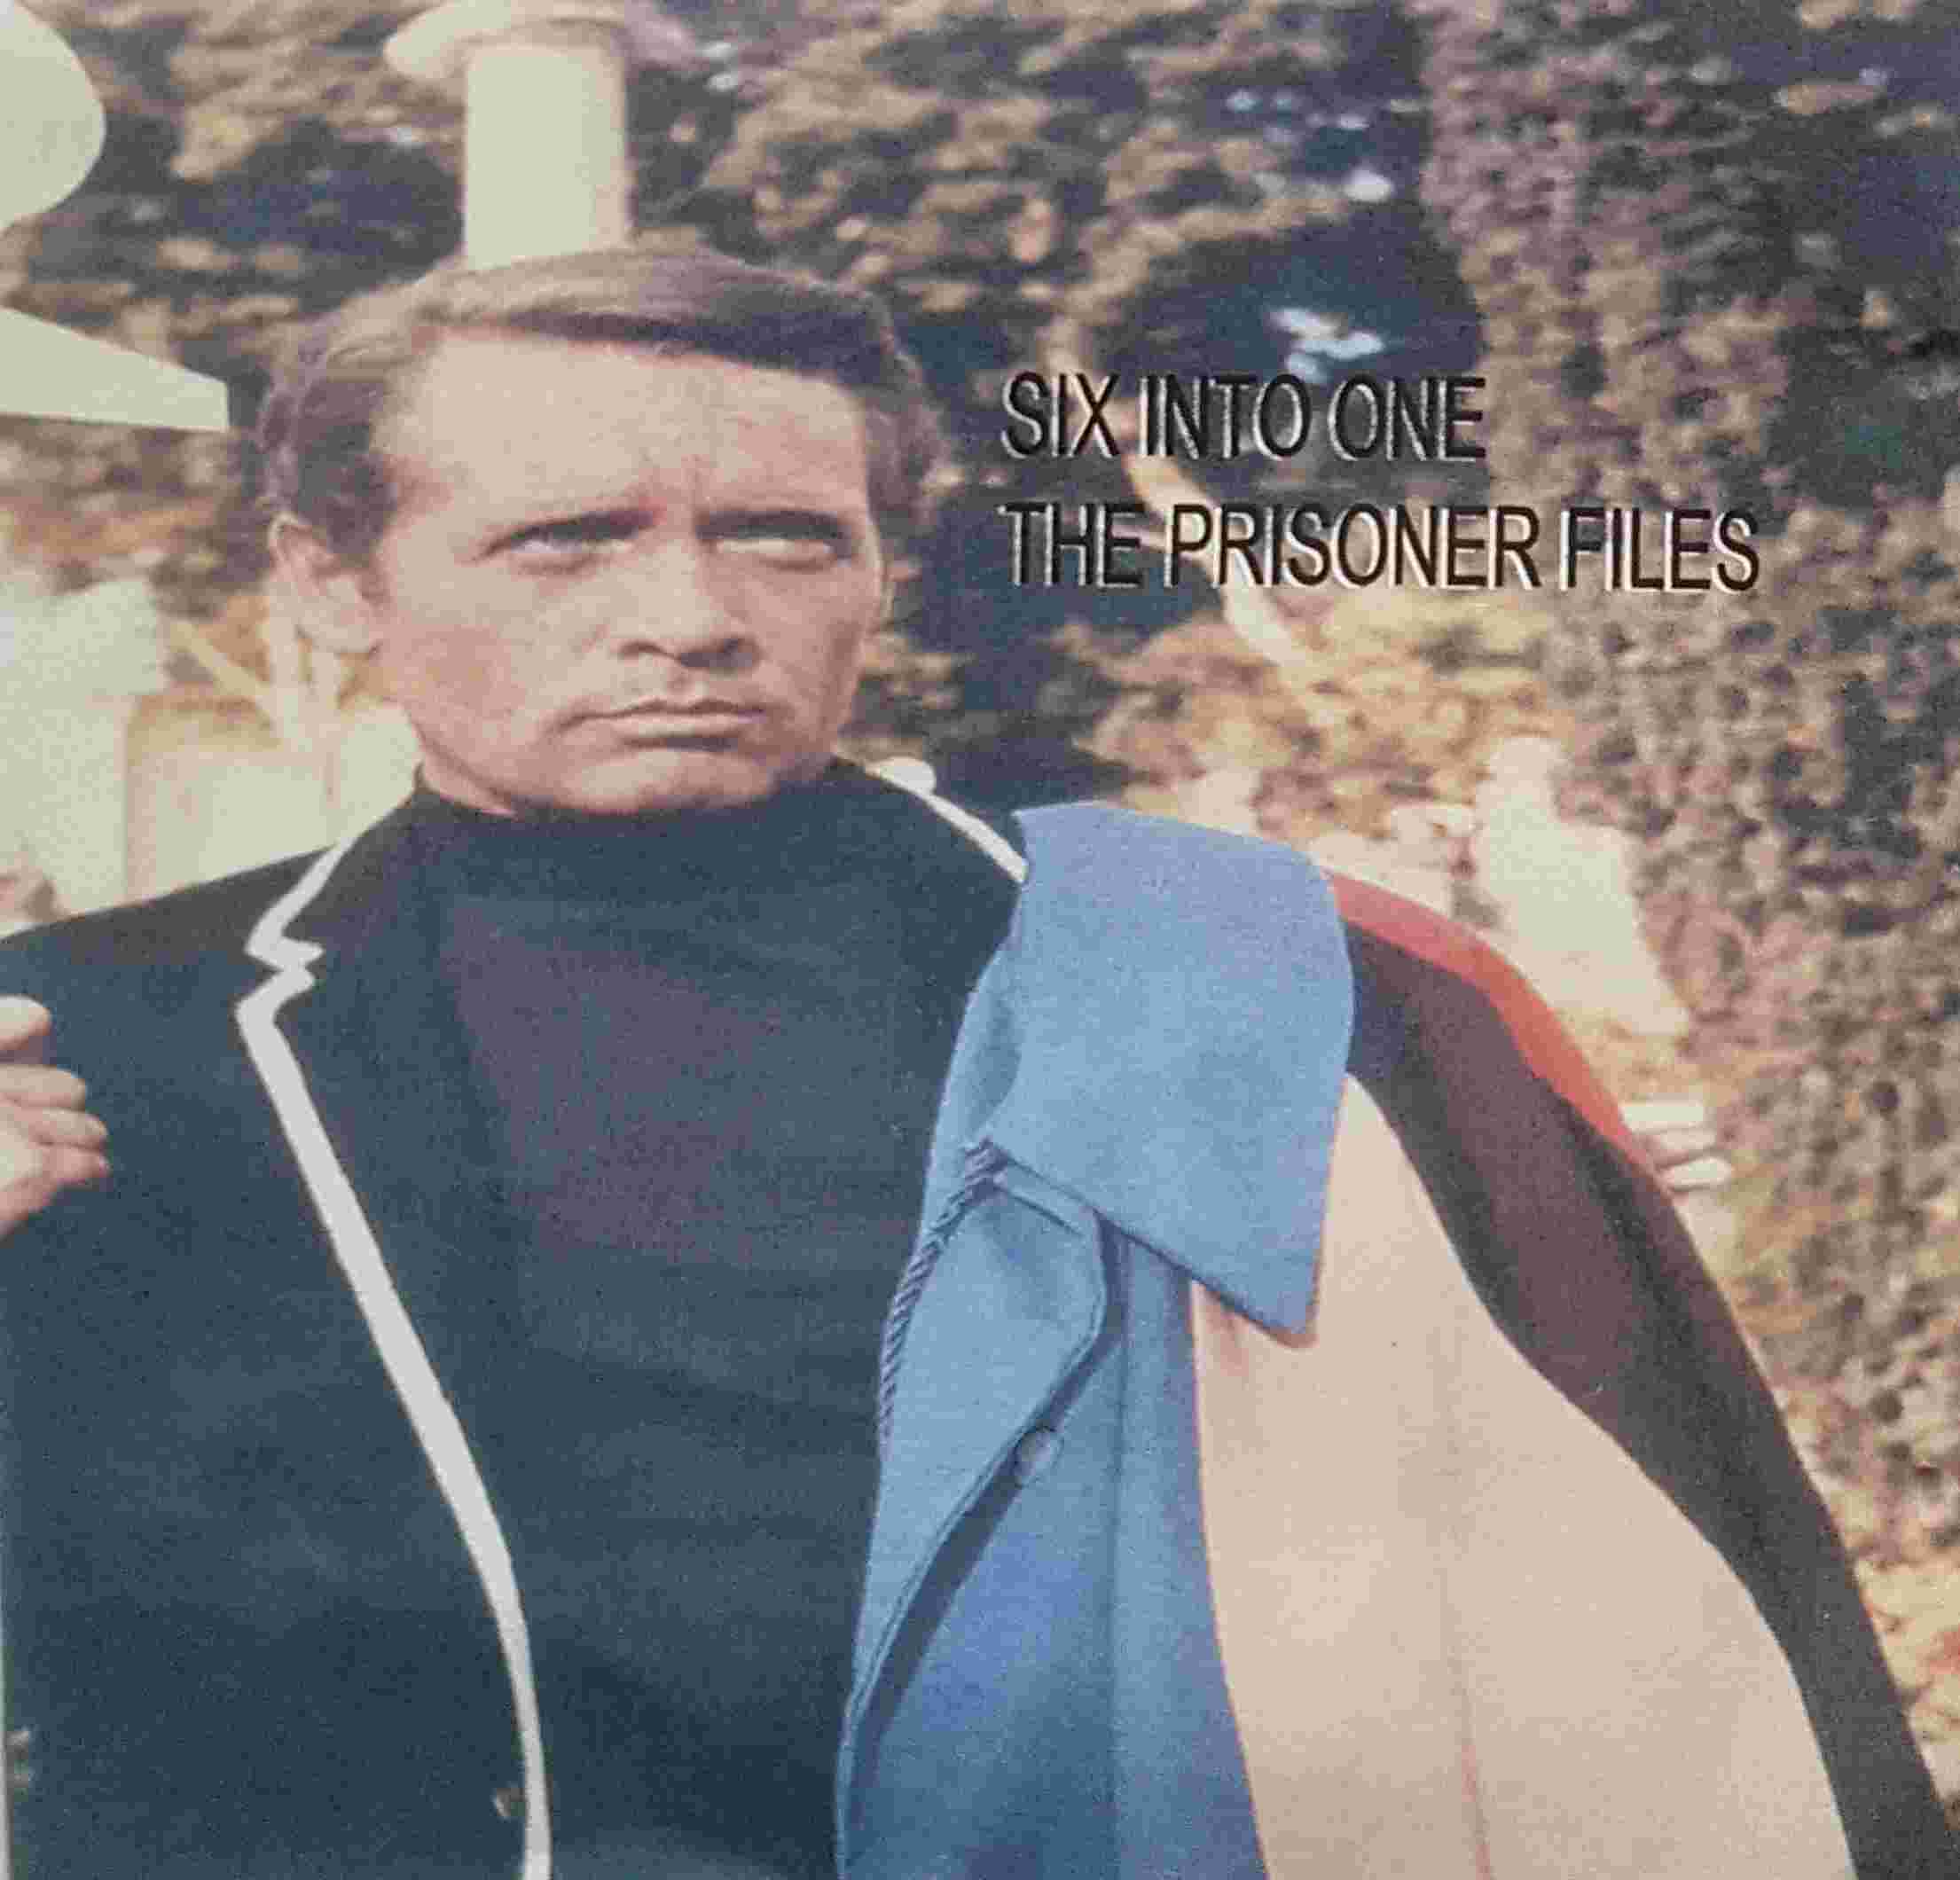 Picture of Six into one - The Prisoner files by artist Laurens C. Postma / Chris Rodley from ITV, Channel 4 and Channel 5 dvds library